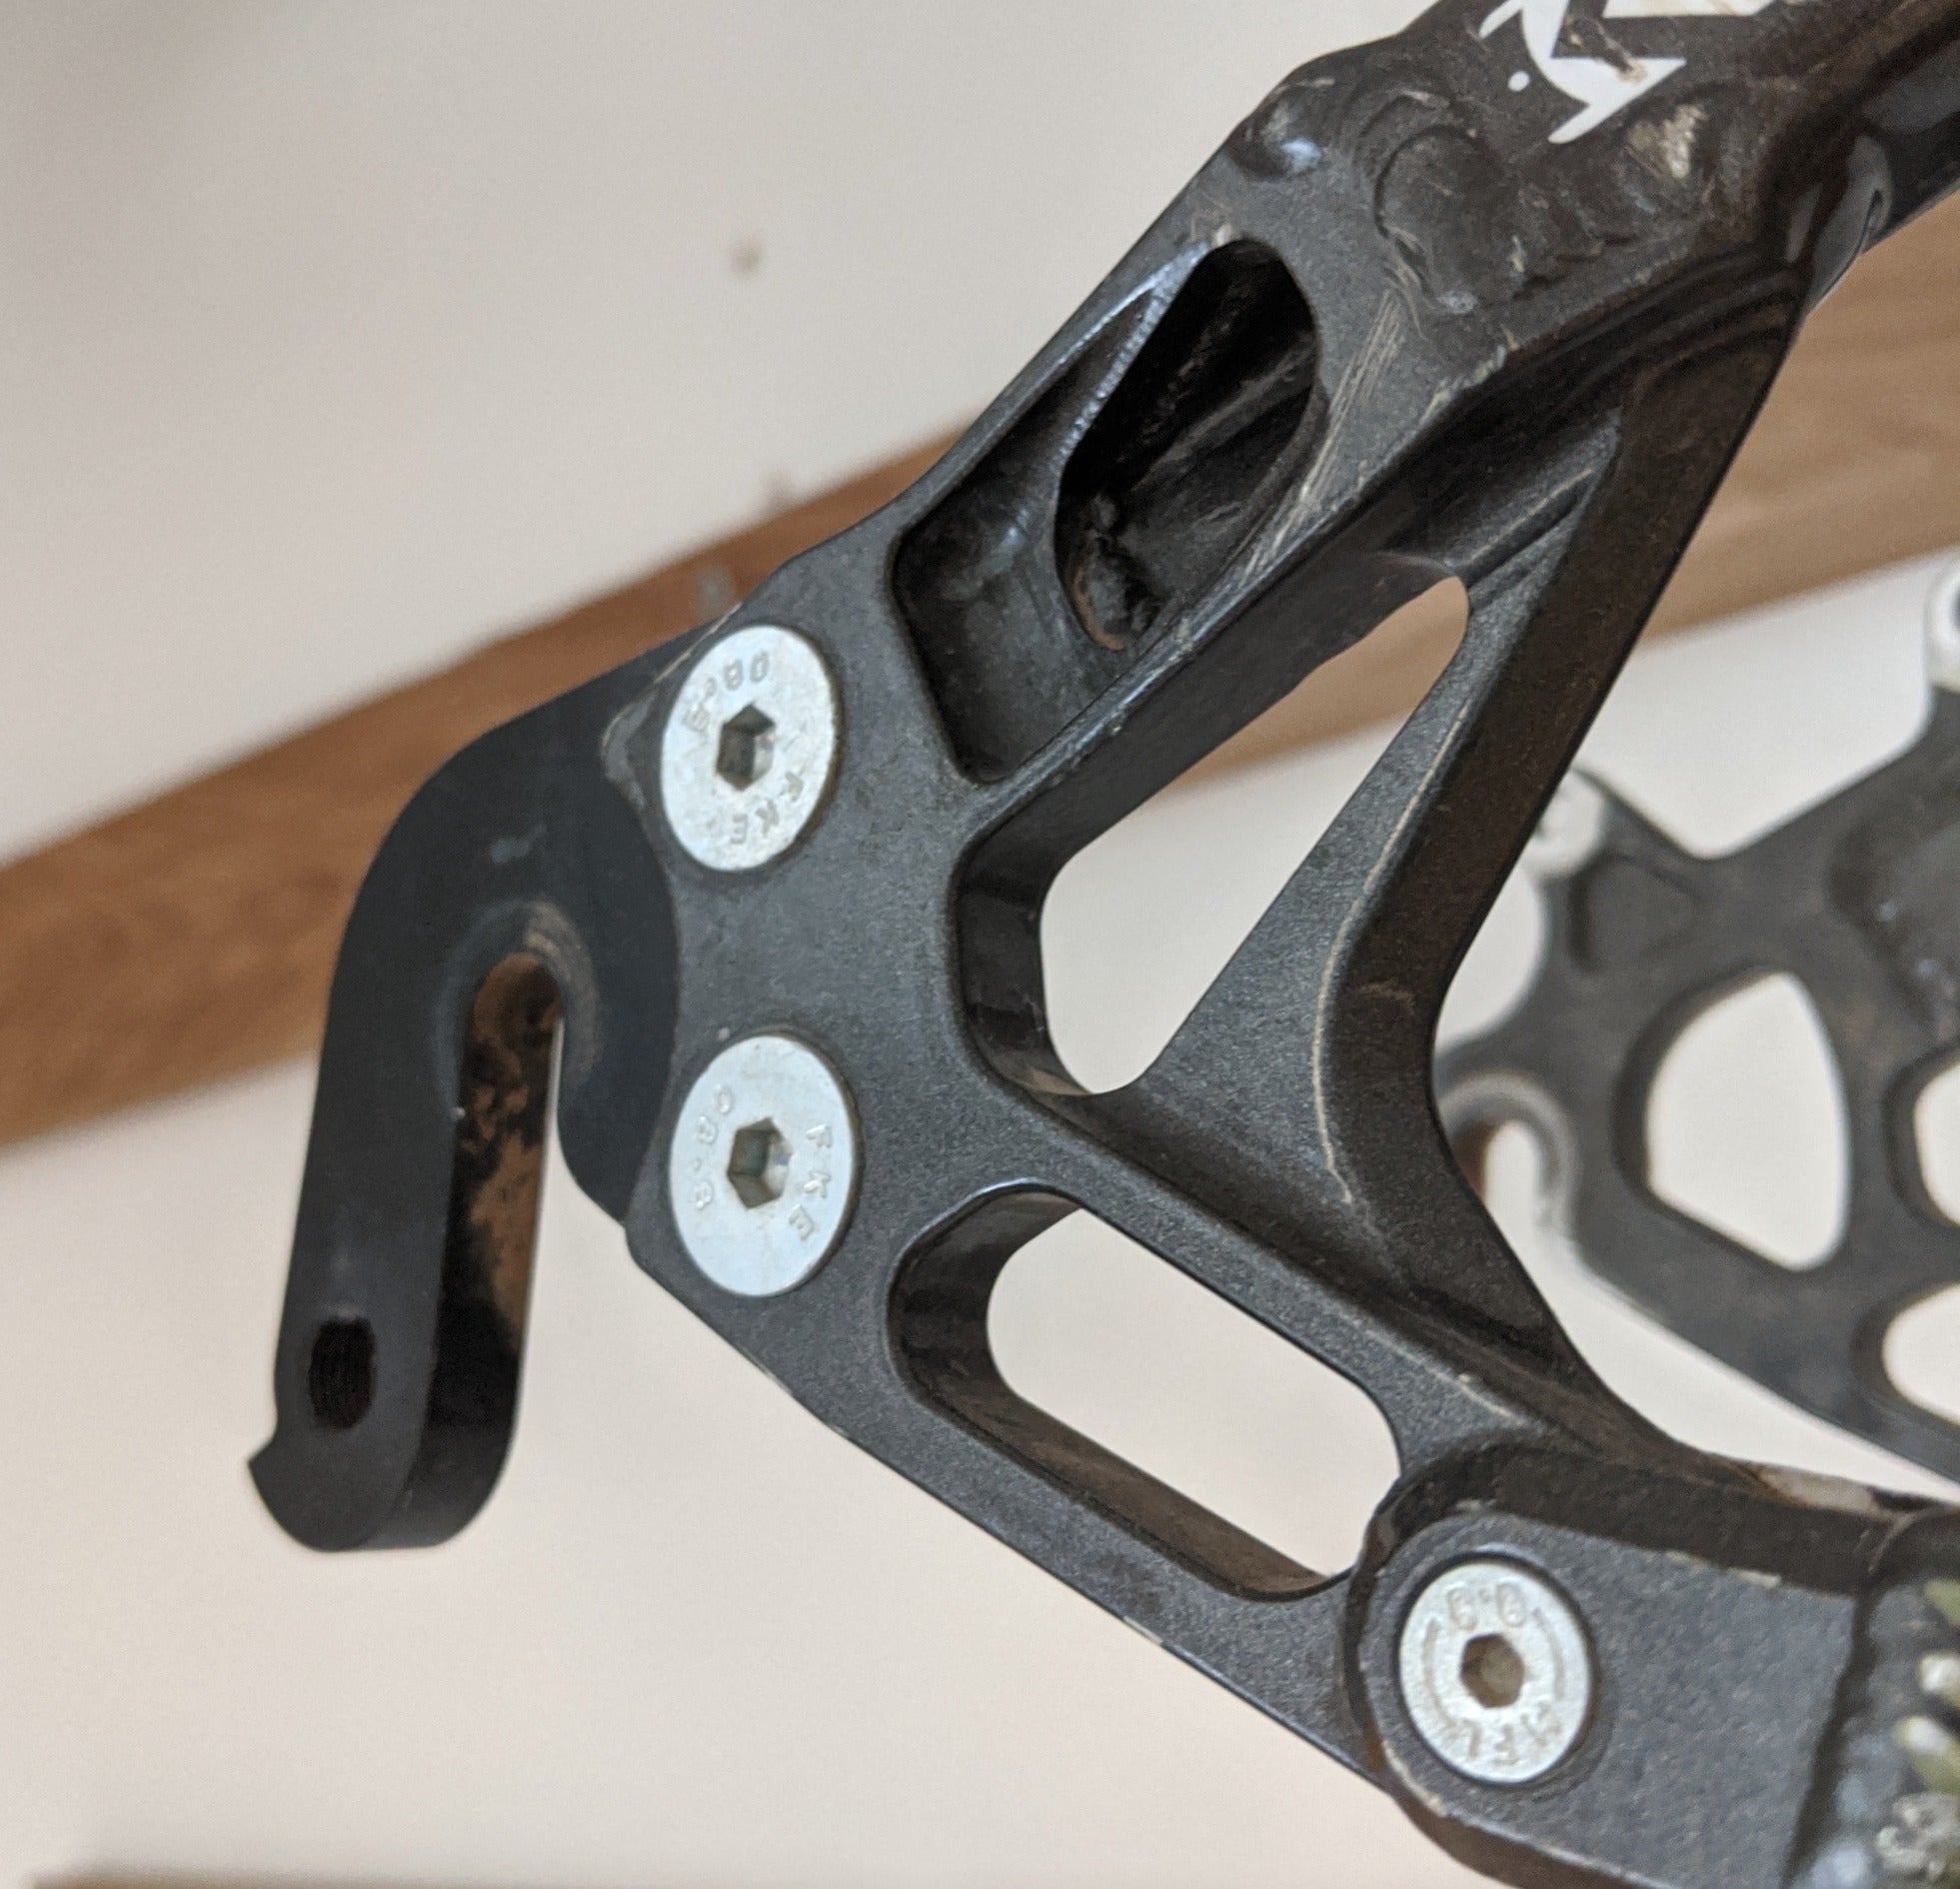 Can a Knolly derailleur hanger save your frame?